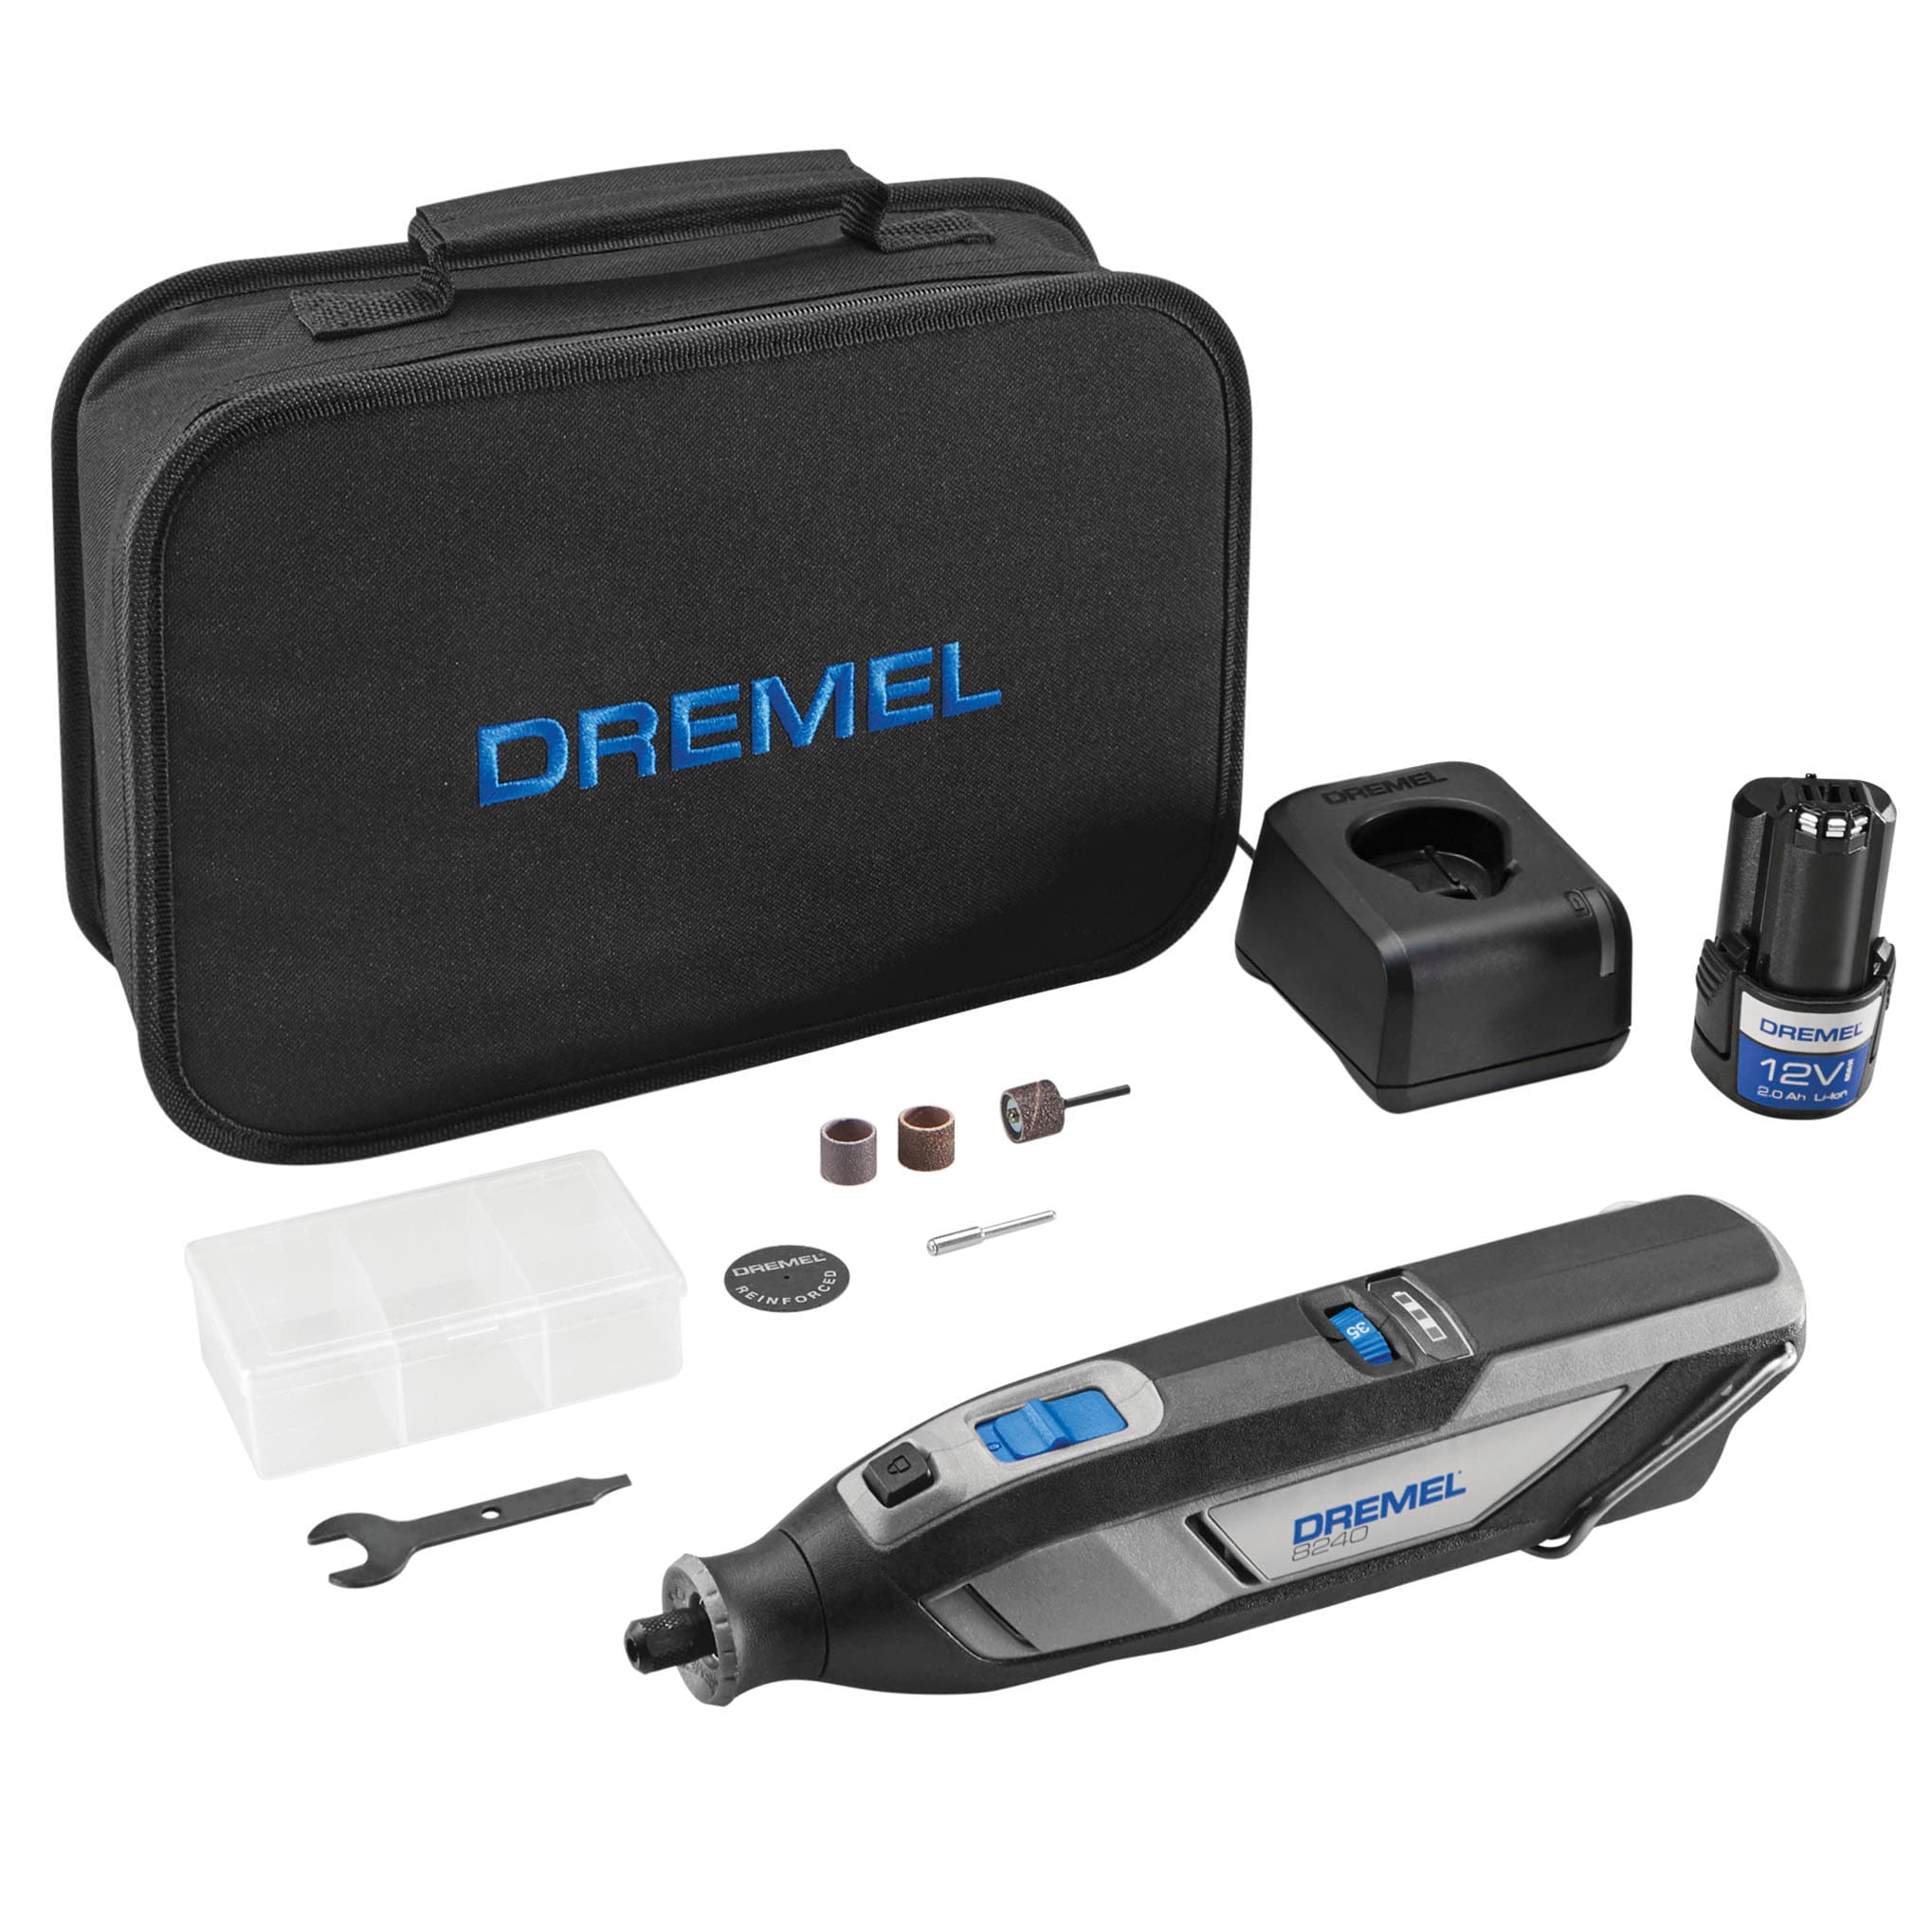 Dremel Electric Engraver Like New Works Great . Awesome tool